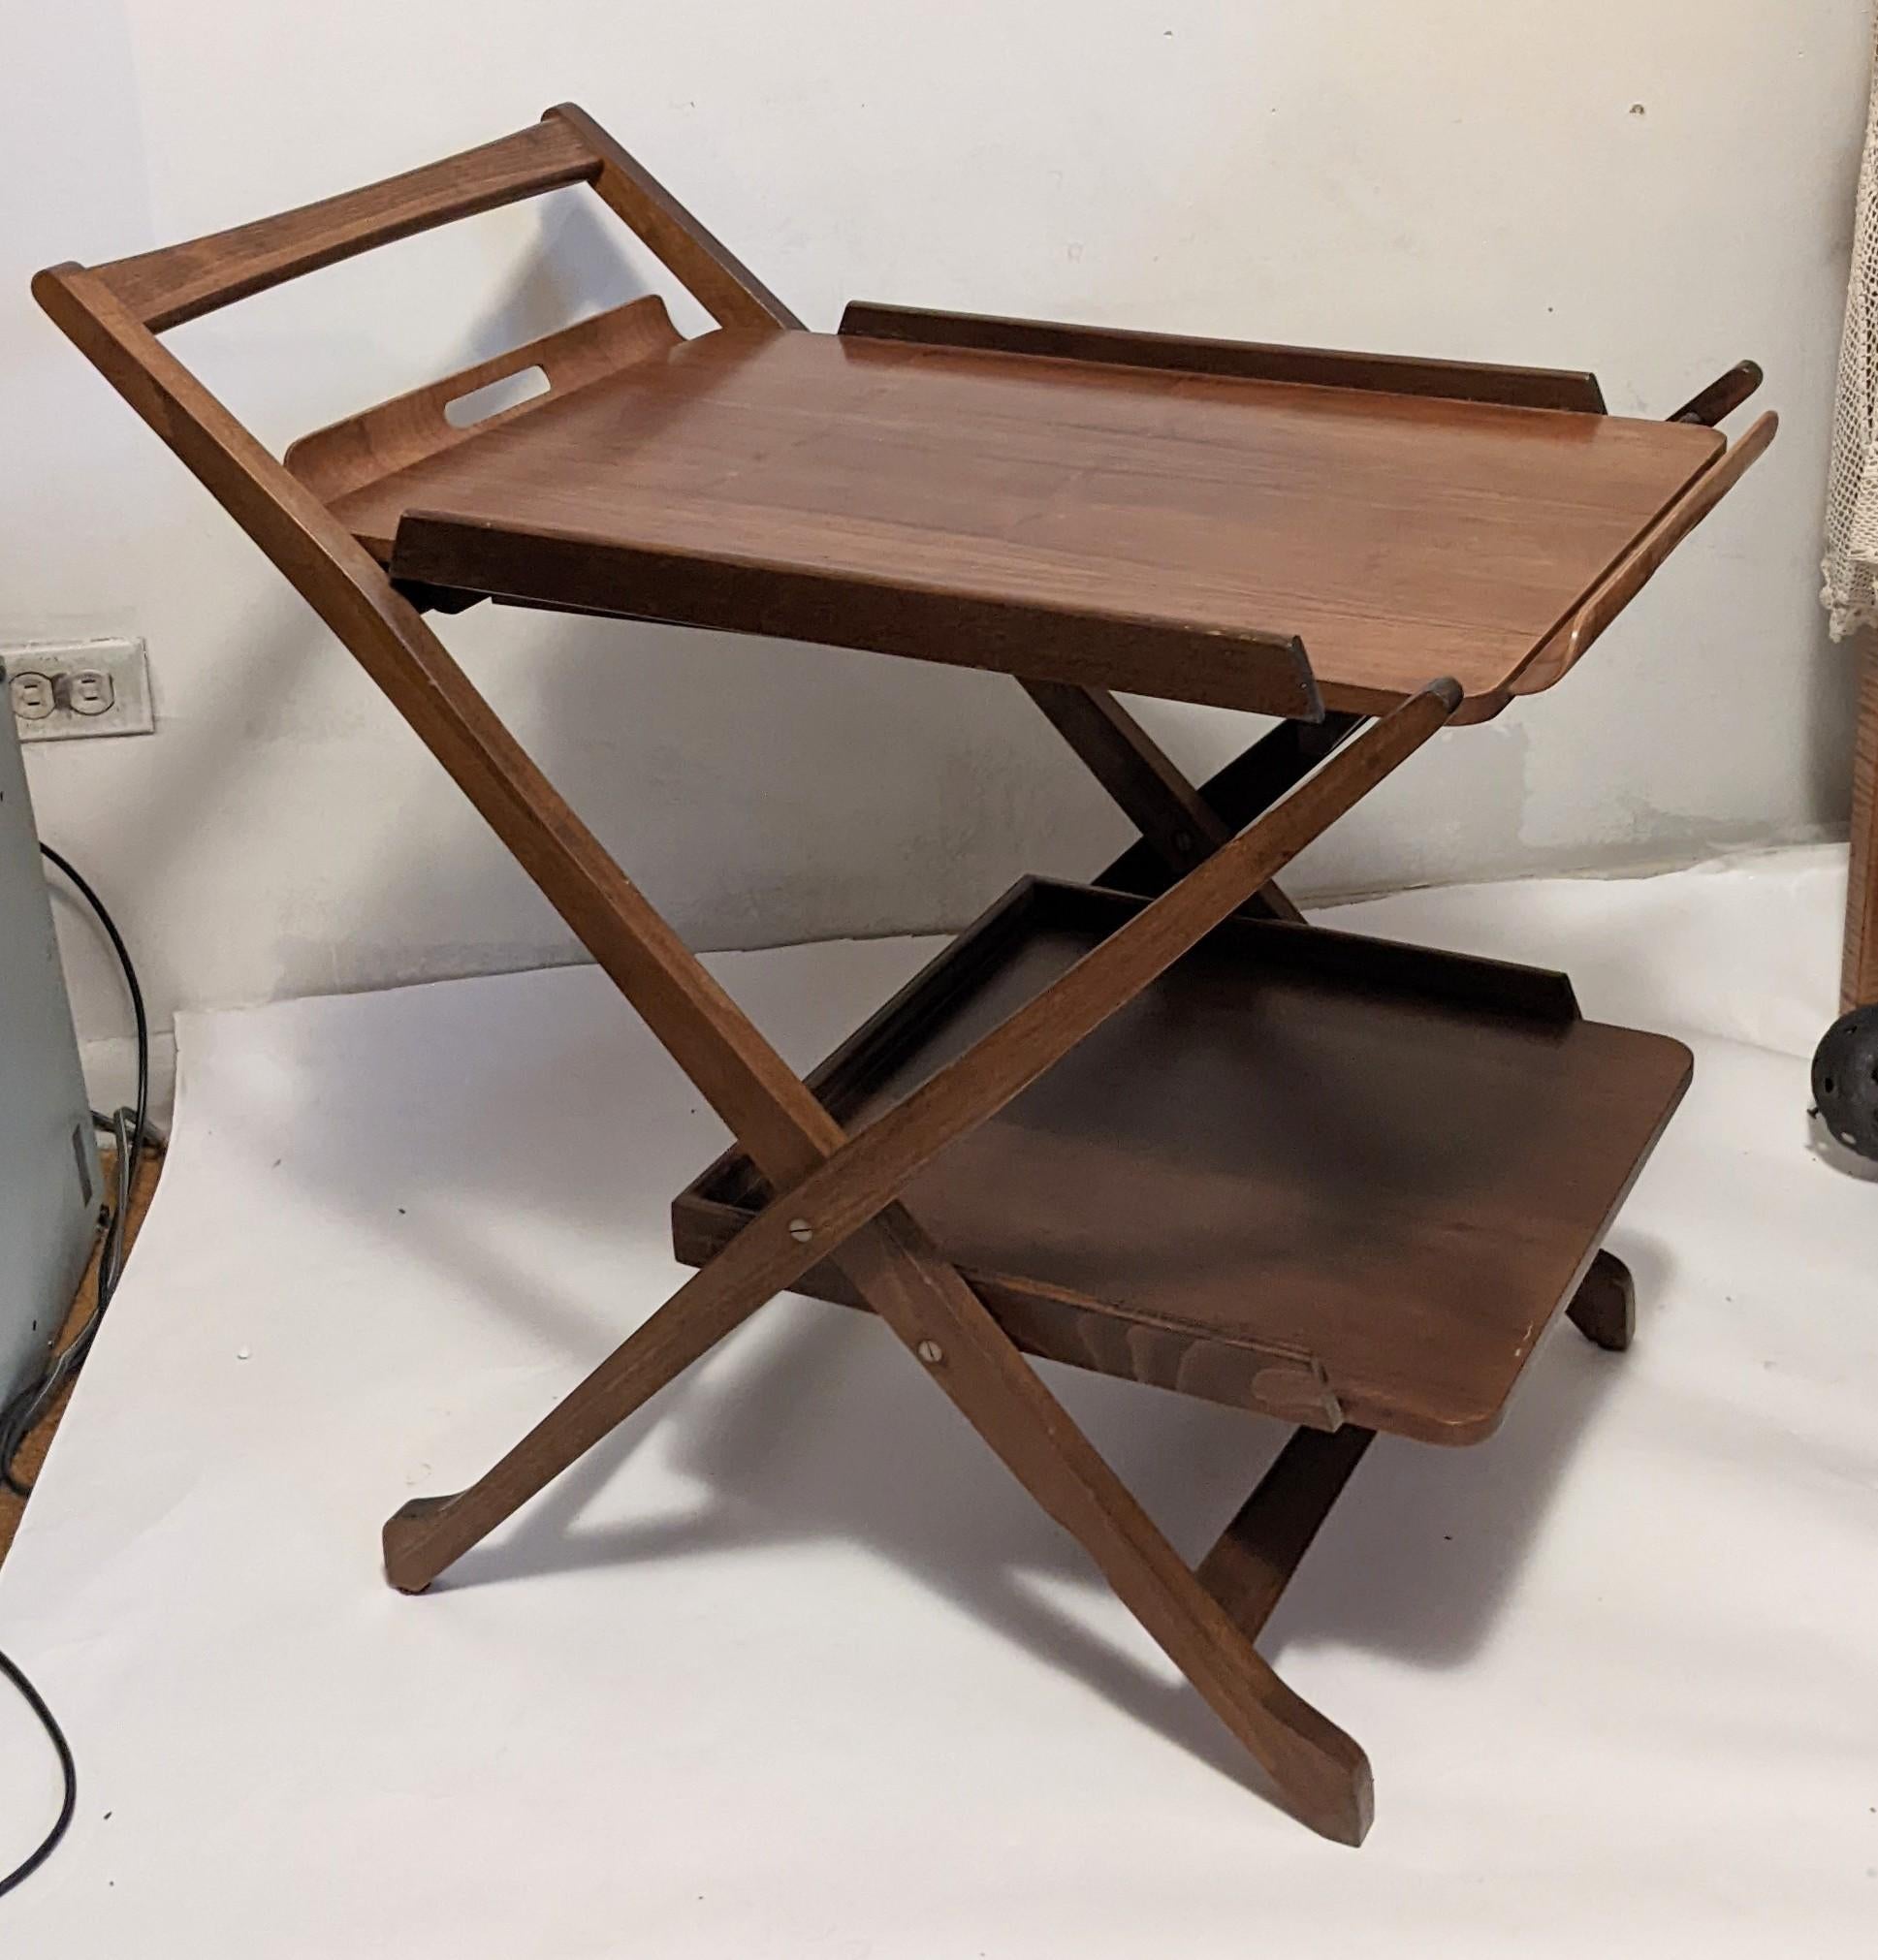 1960's folding wood bar stand with removable tray. Super practical for apt living, the cart folds flat and the removable tray even has extendable legs for use as a small side table or for use serving breakfast in bed. The pieces all fold flat for